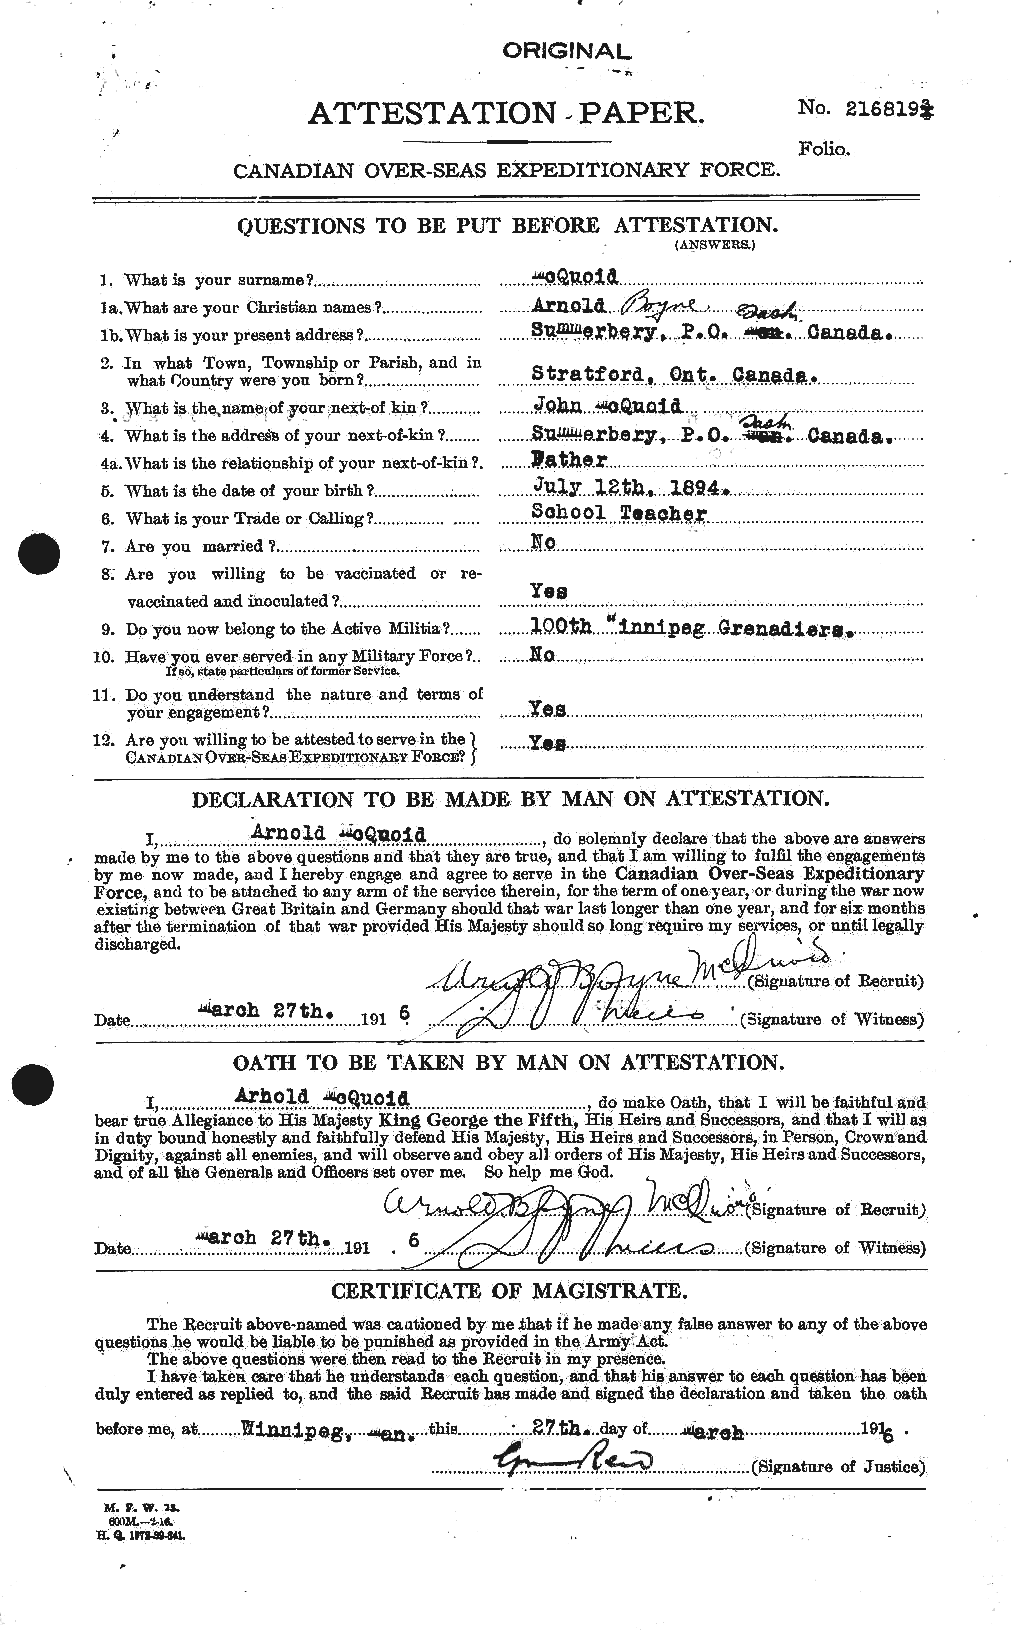 Personnel Records of the First World War - CEF 546070a